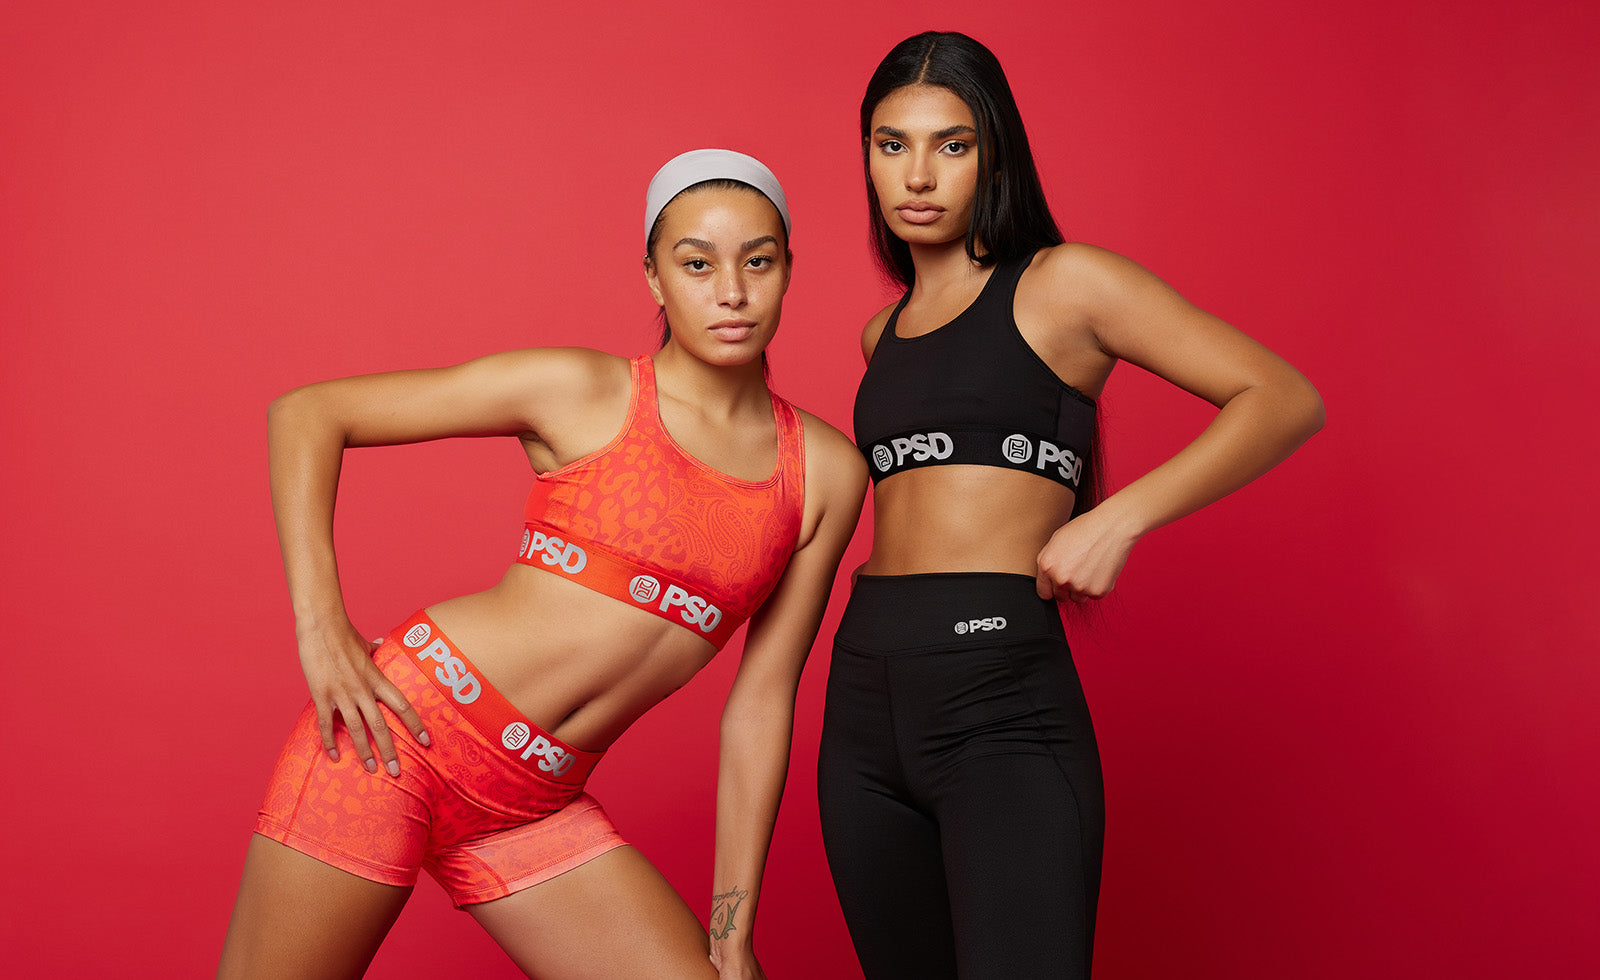 Women's Workout Tops, Athletic Shirts & Activewear